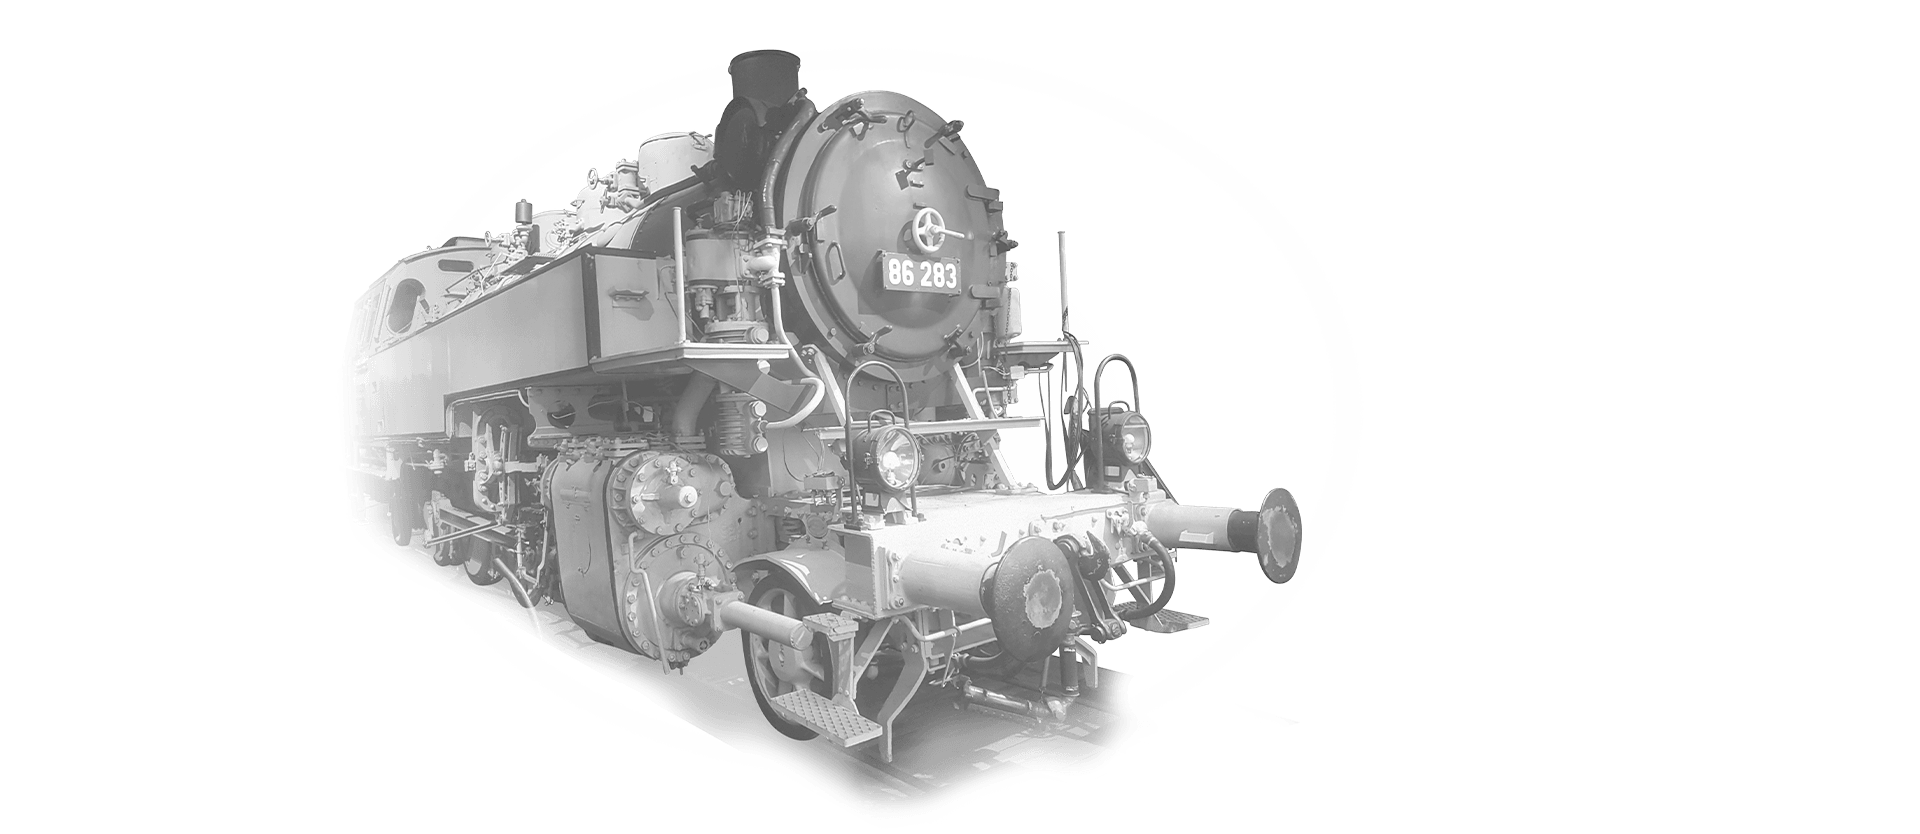 The locomotive 86-183 is coming towards the camera in black and white